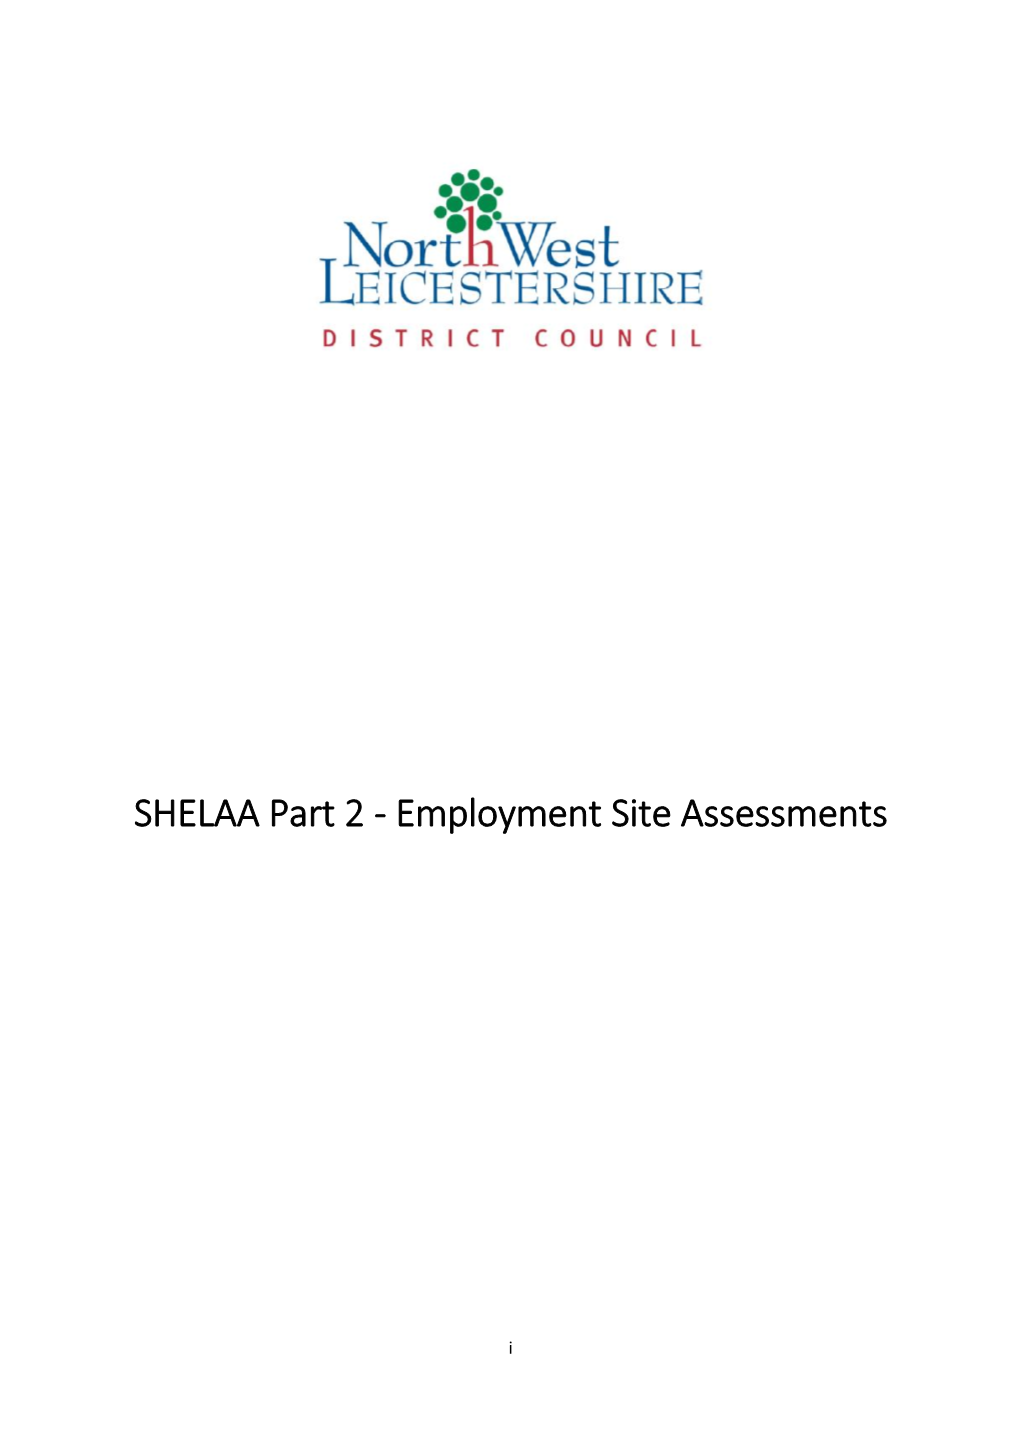 Employment Site Assessments